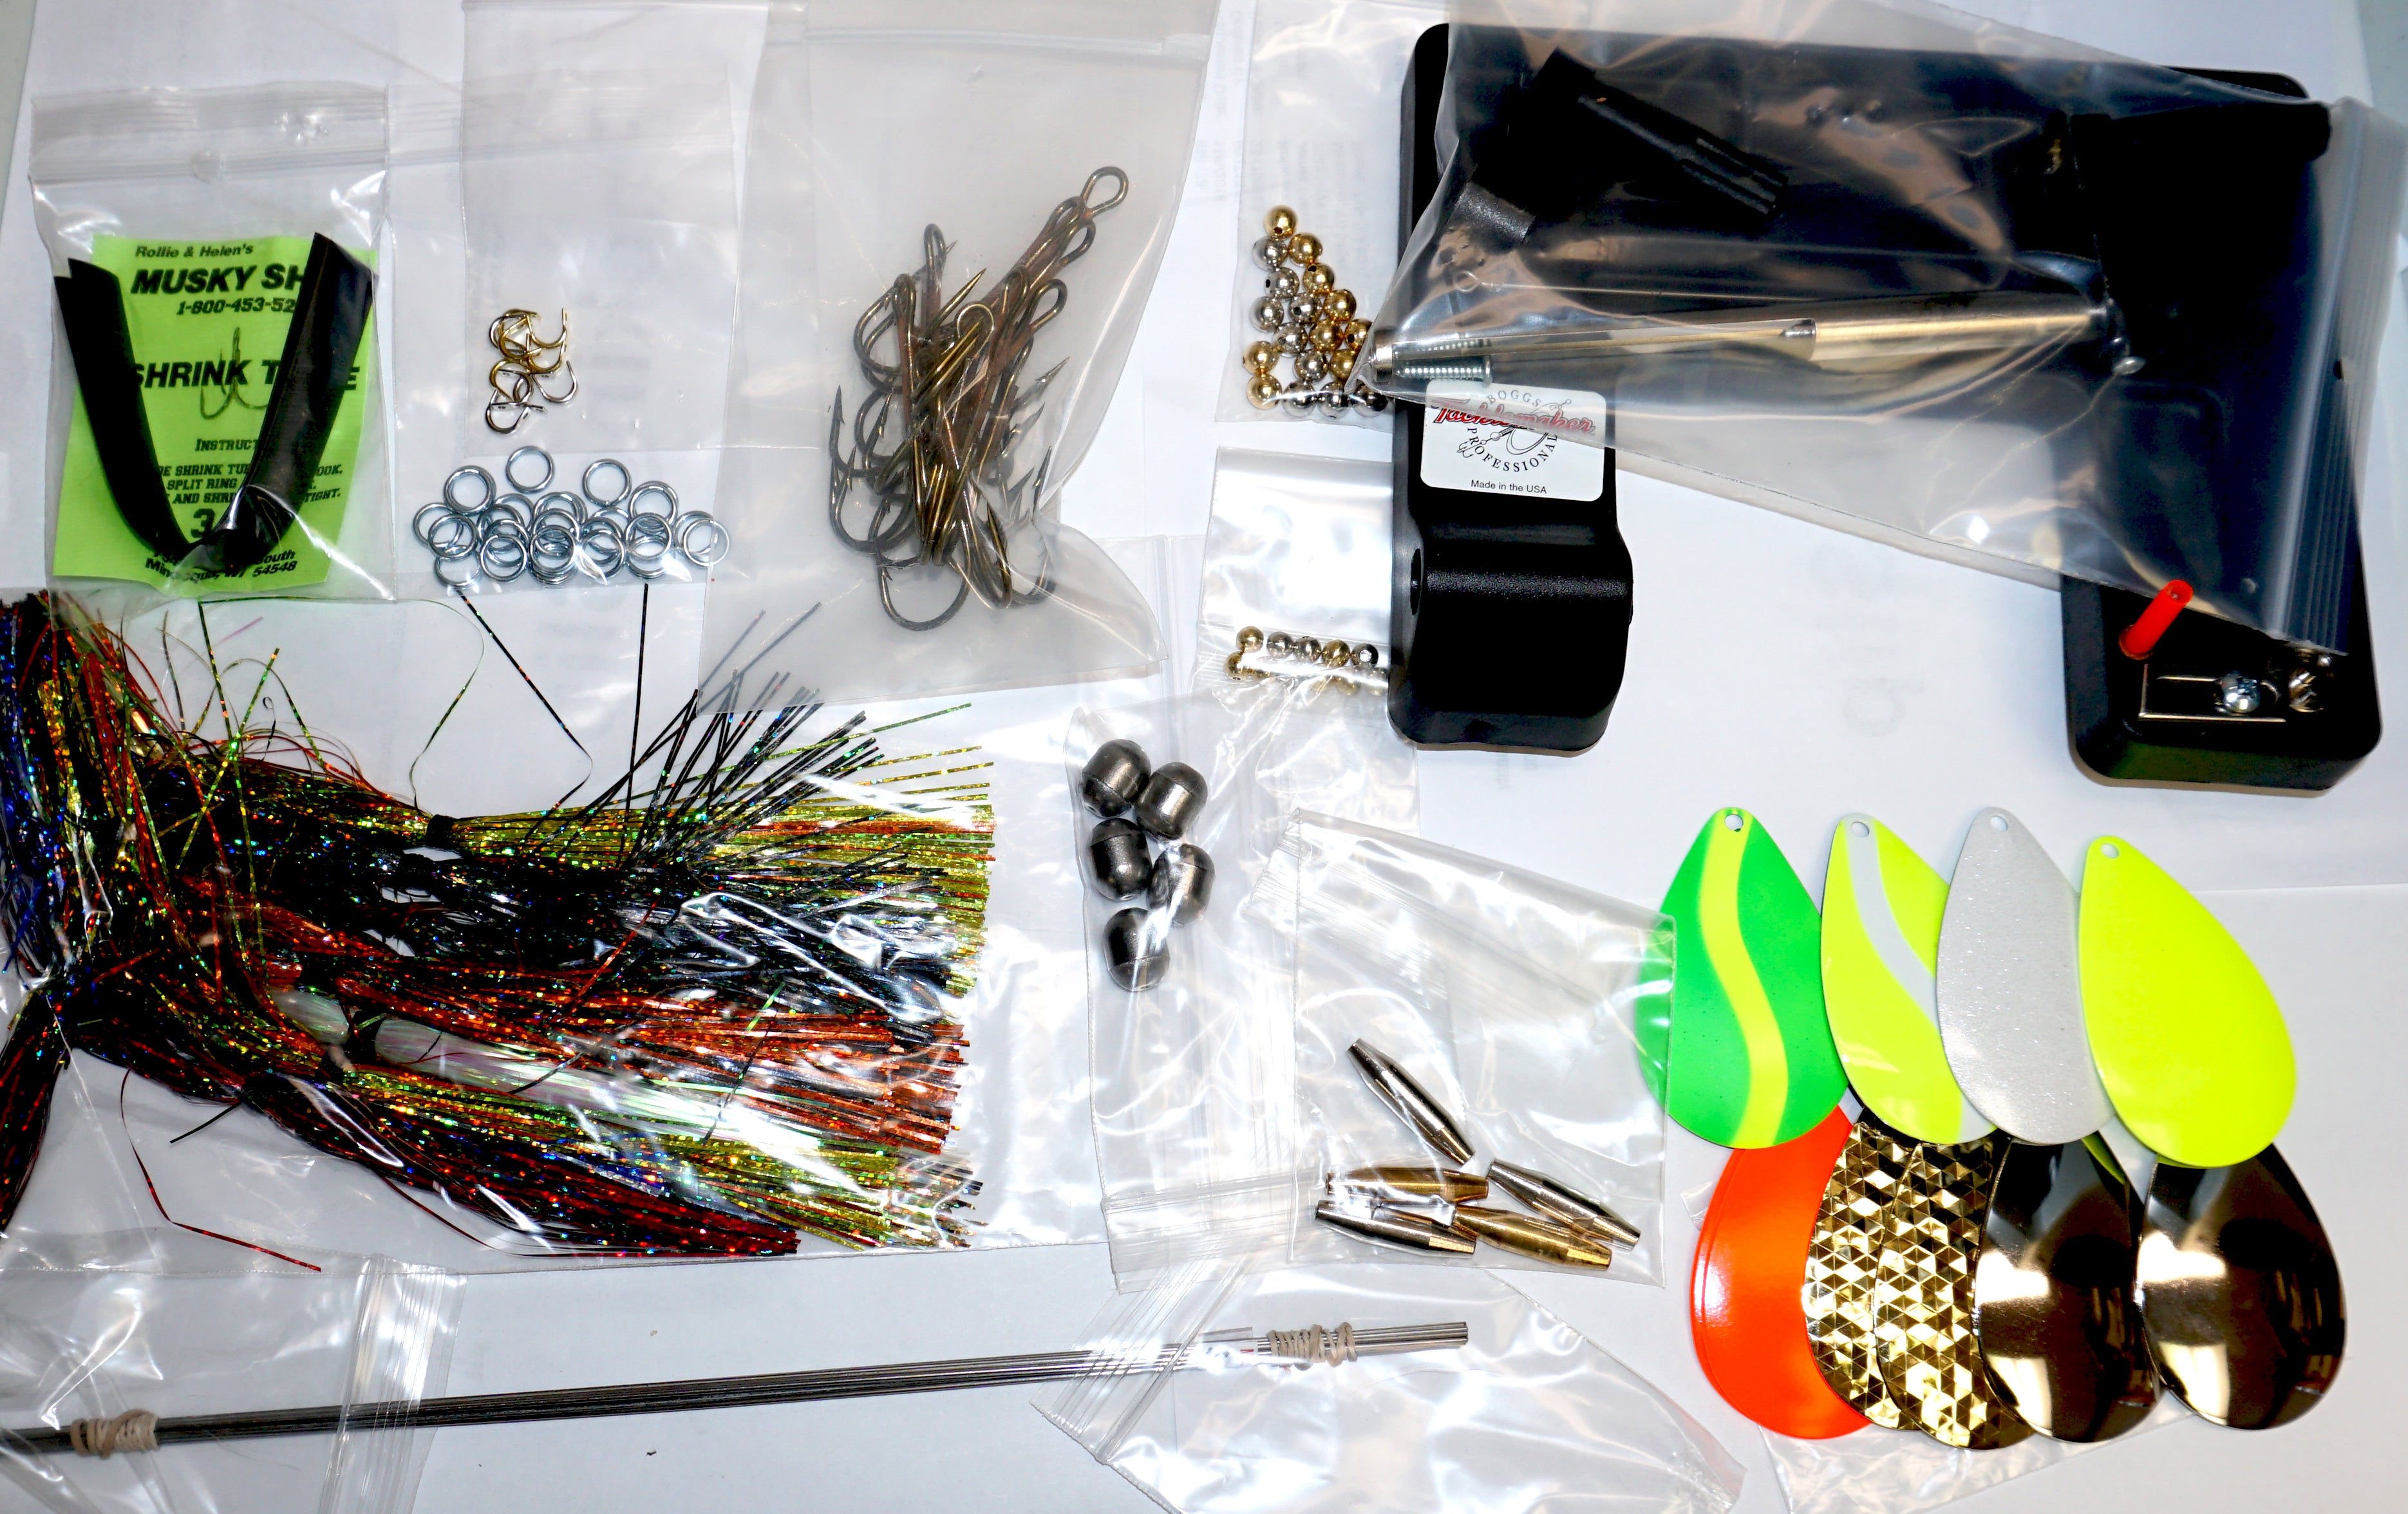 Beginners Freshwater / Musky Lure Building Parts Kits